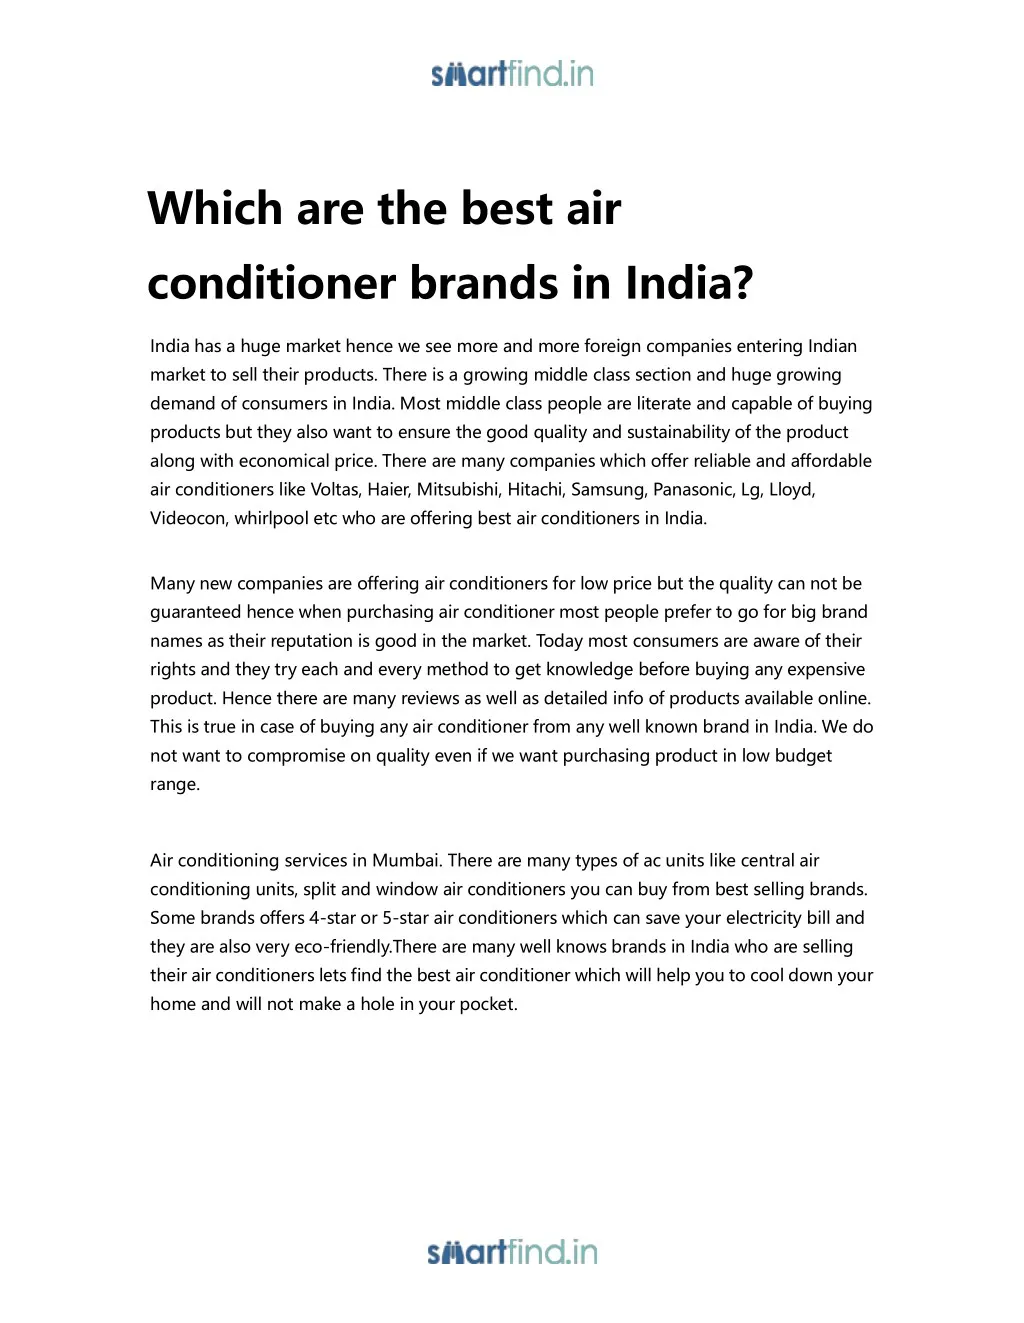 which are the best air conditioner brands in india